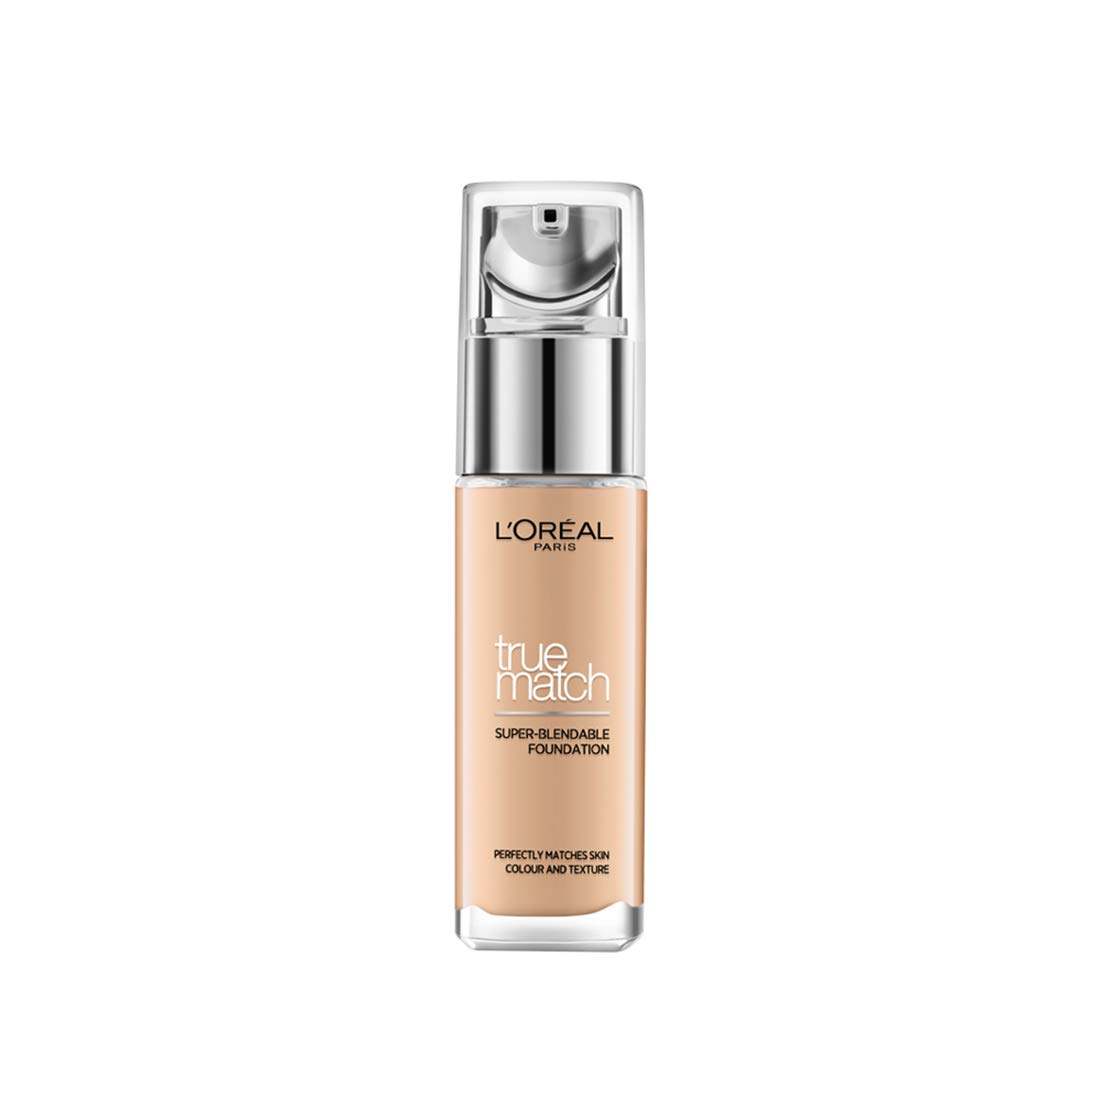 LOreal Paris True Match Foundation 18 Best Foundations for Flawless-Looking Skin, Tested by Makeup Pros